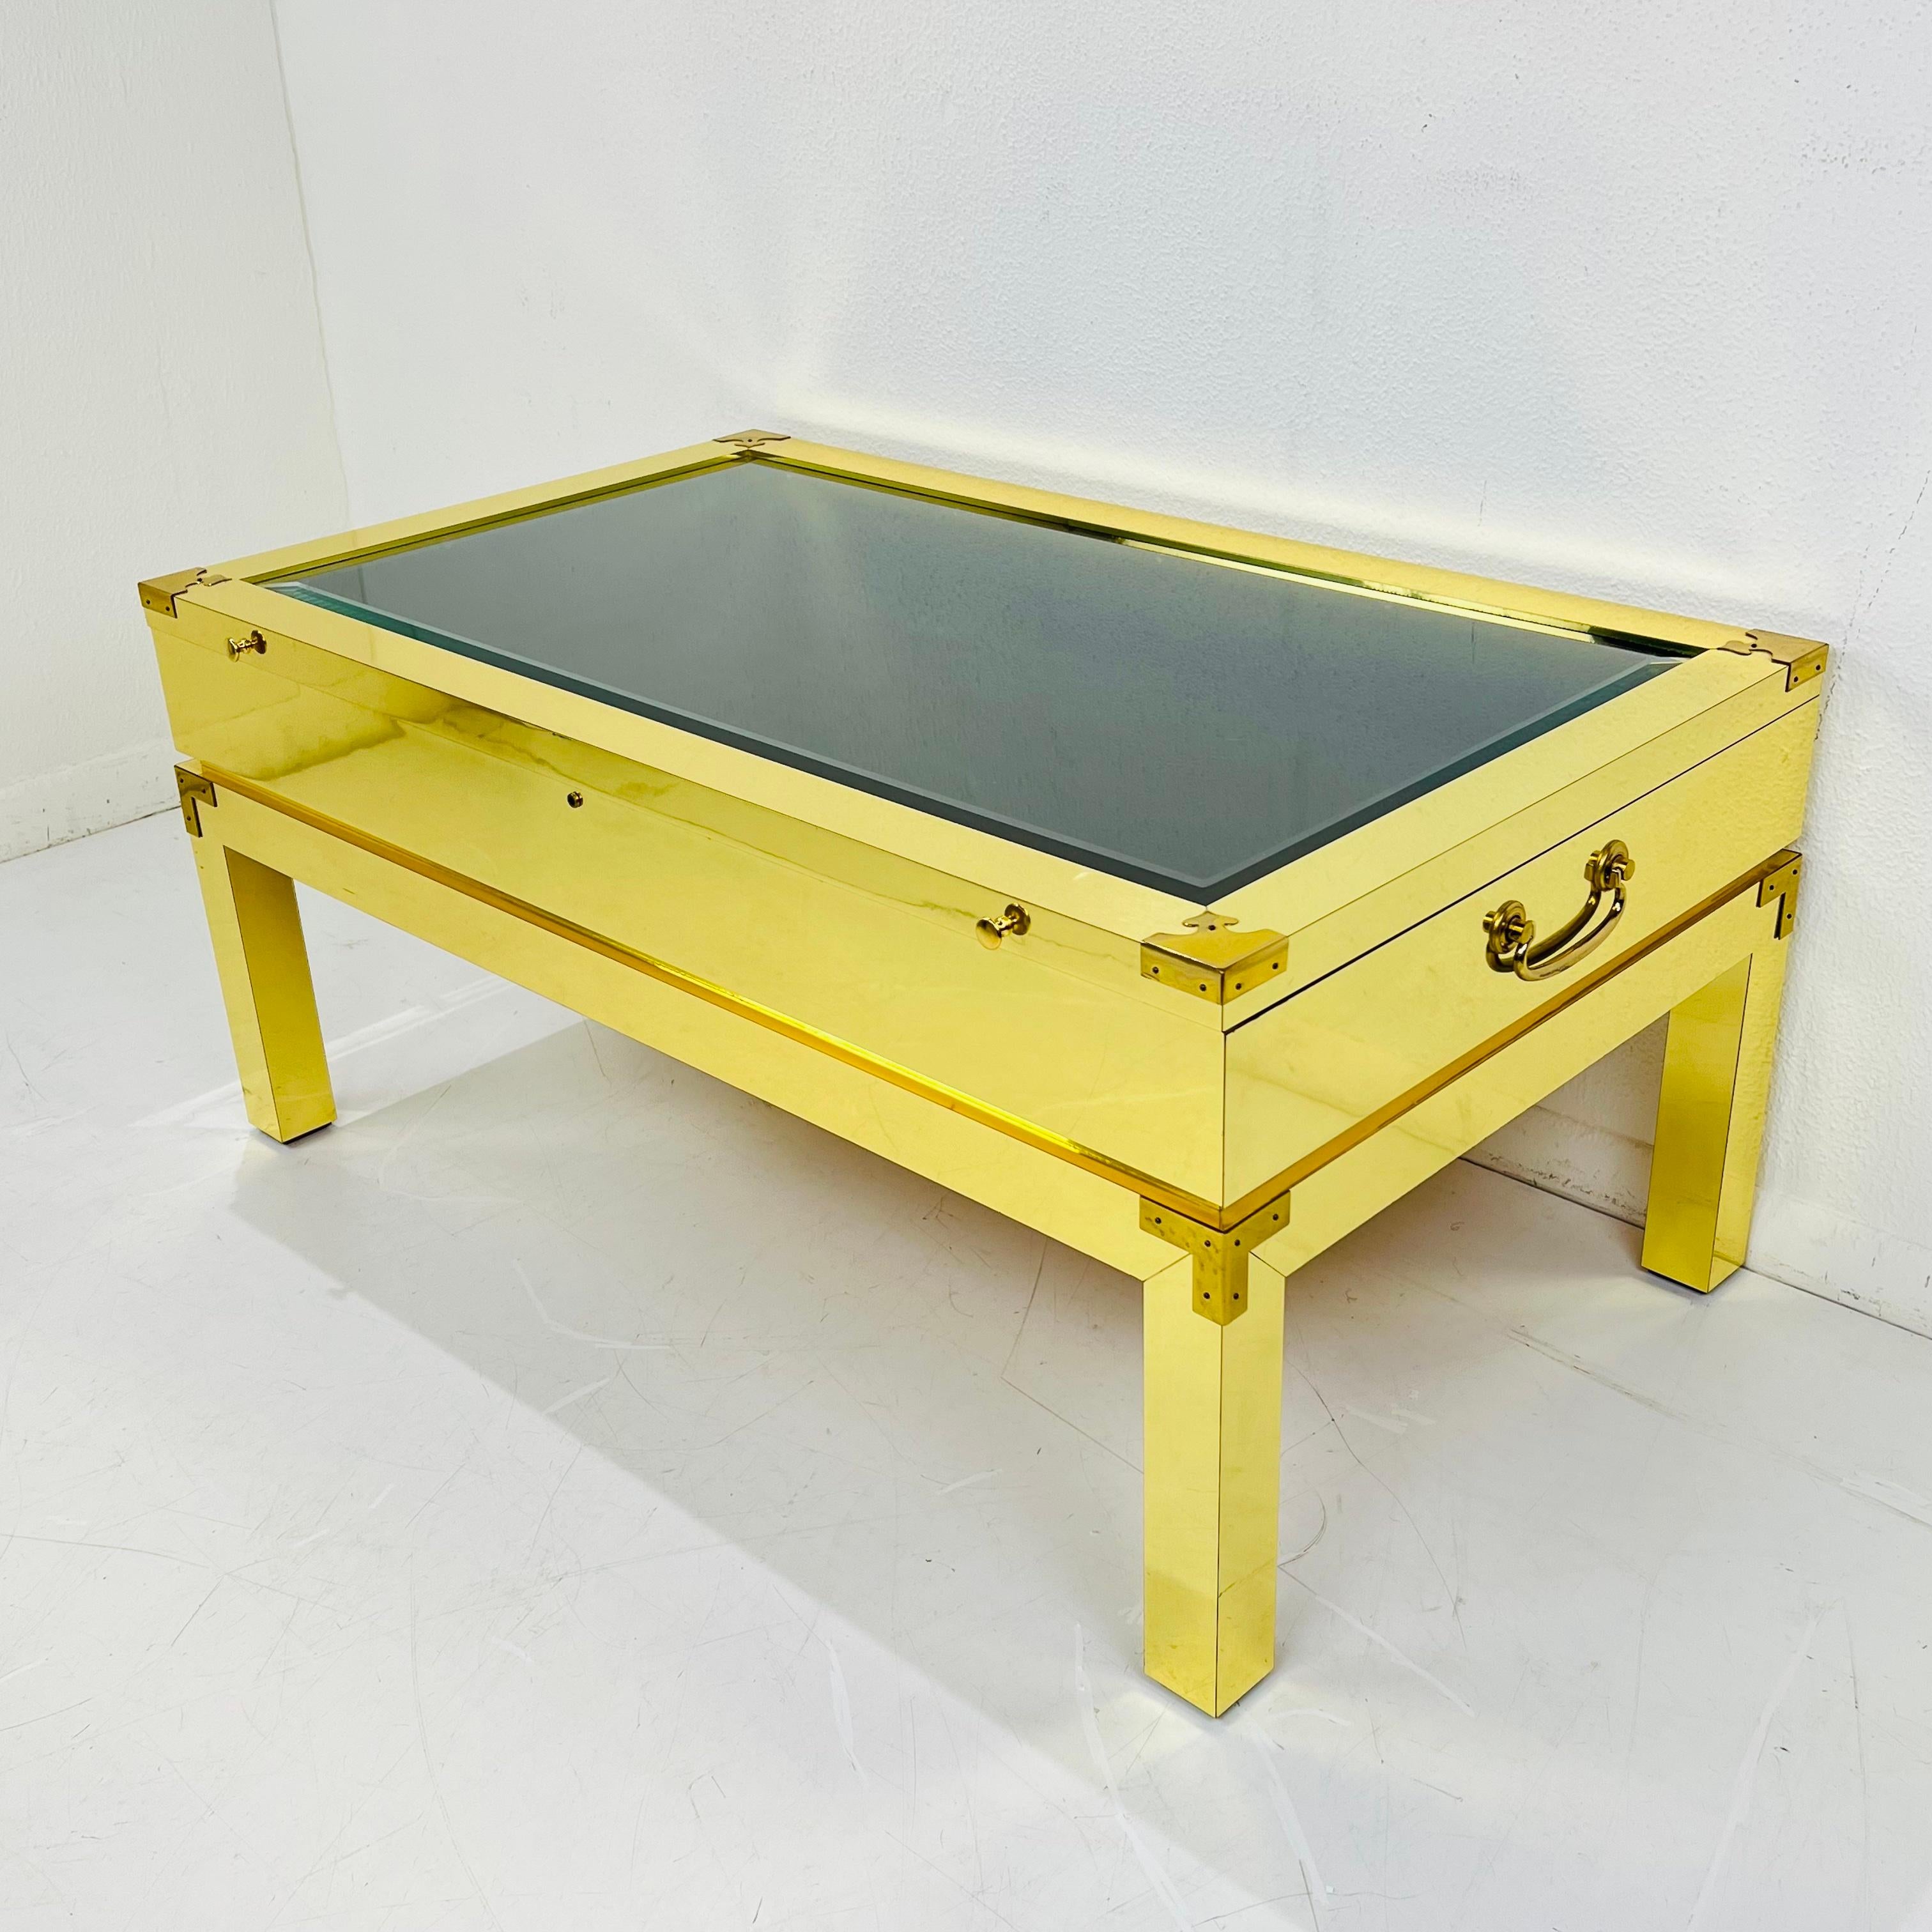 Unique brass wrapped campaign style display coffee table. Thick glass top opens to a soft lined interior, and the full piece is wrapped in brass and supported by square block legs. One of a kind! Very good, lightly used condition. 